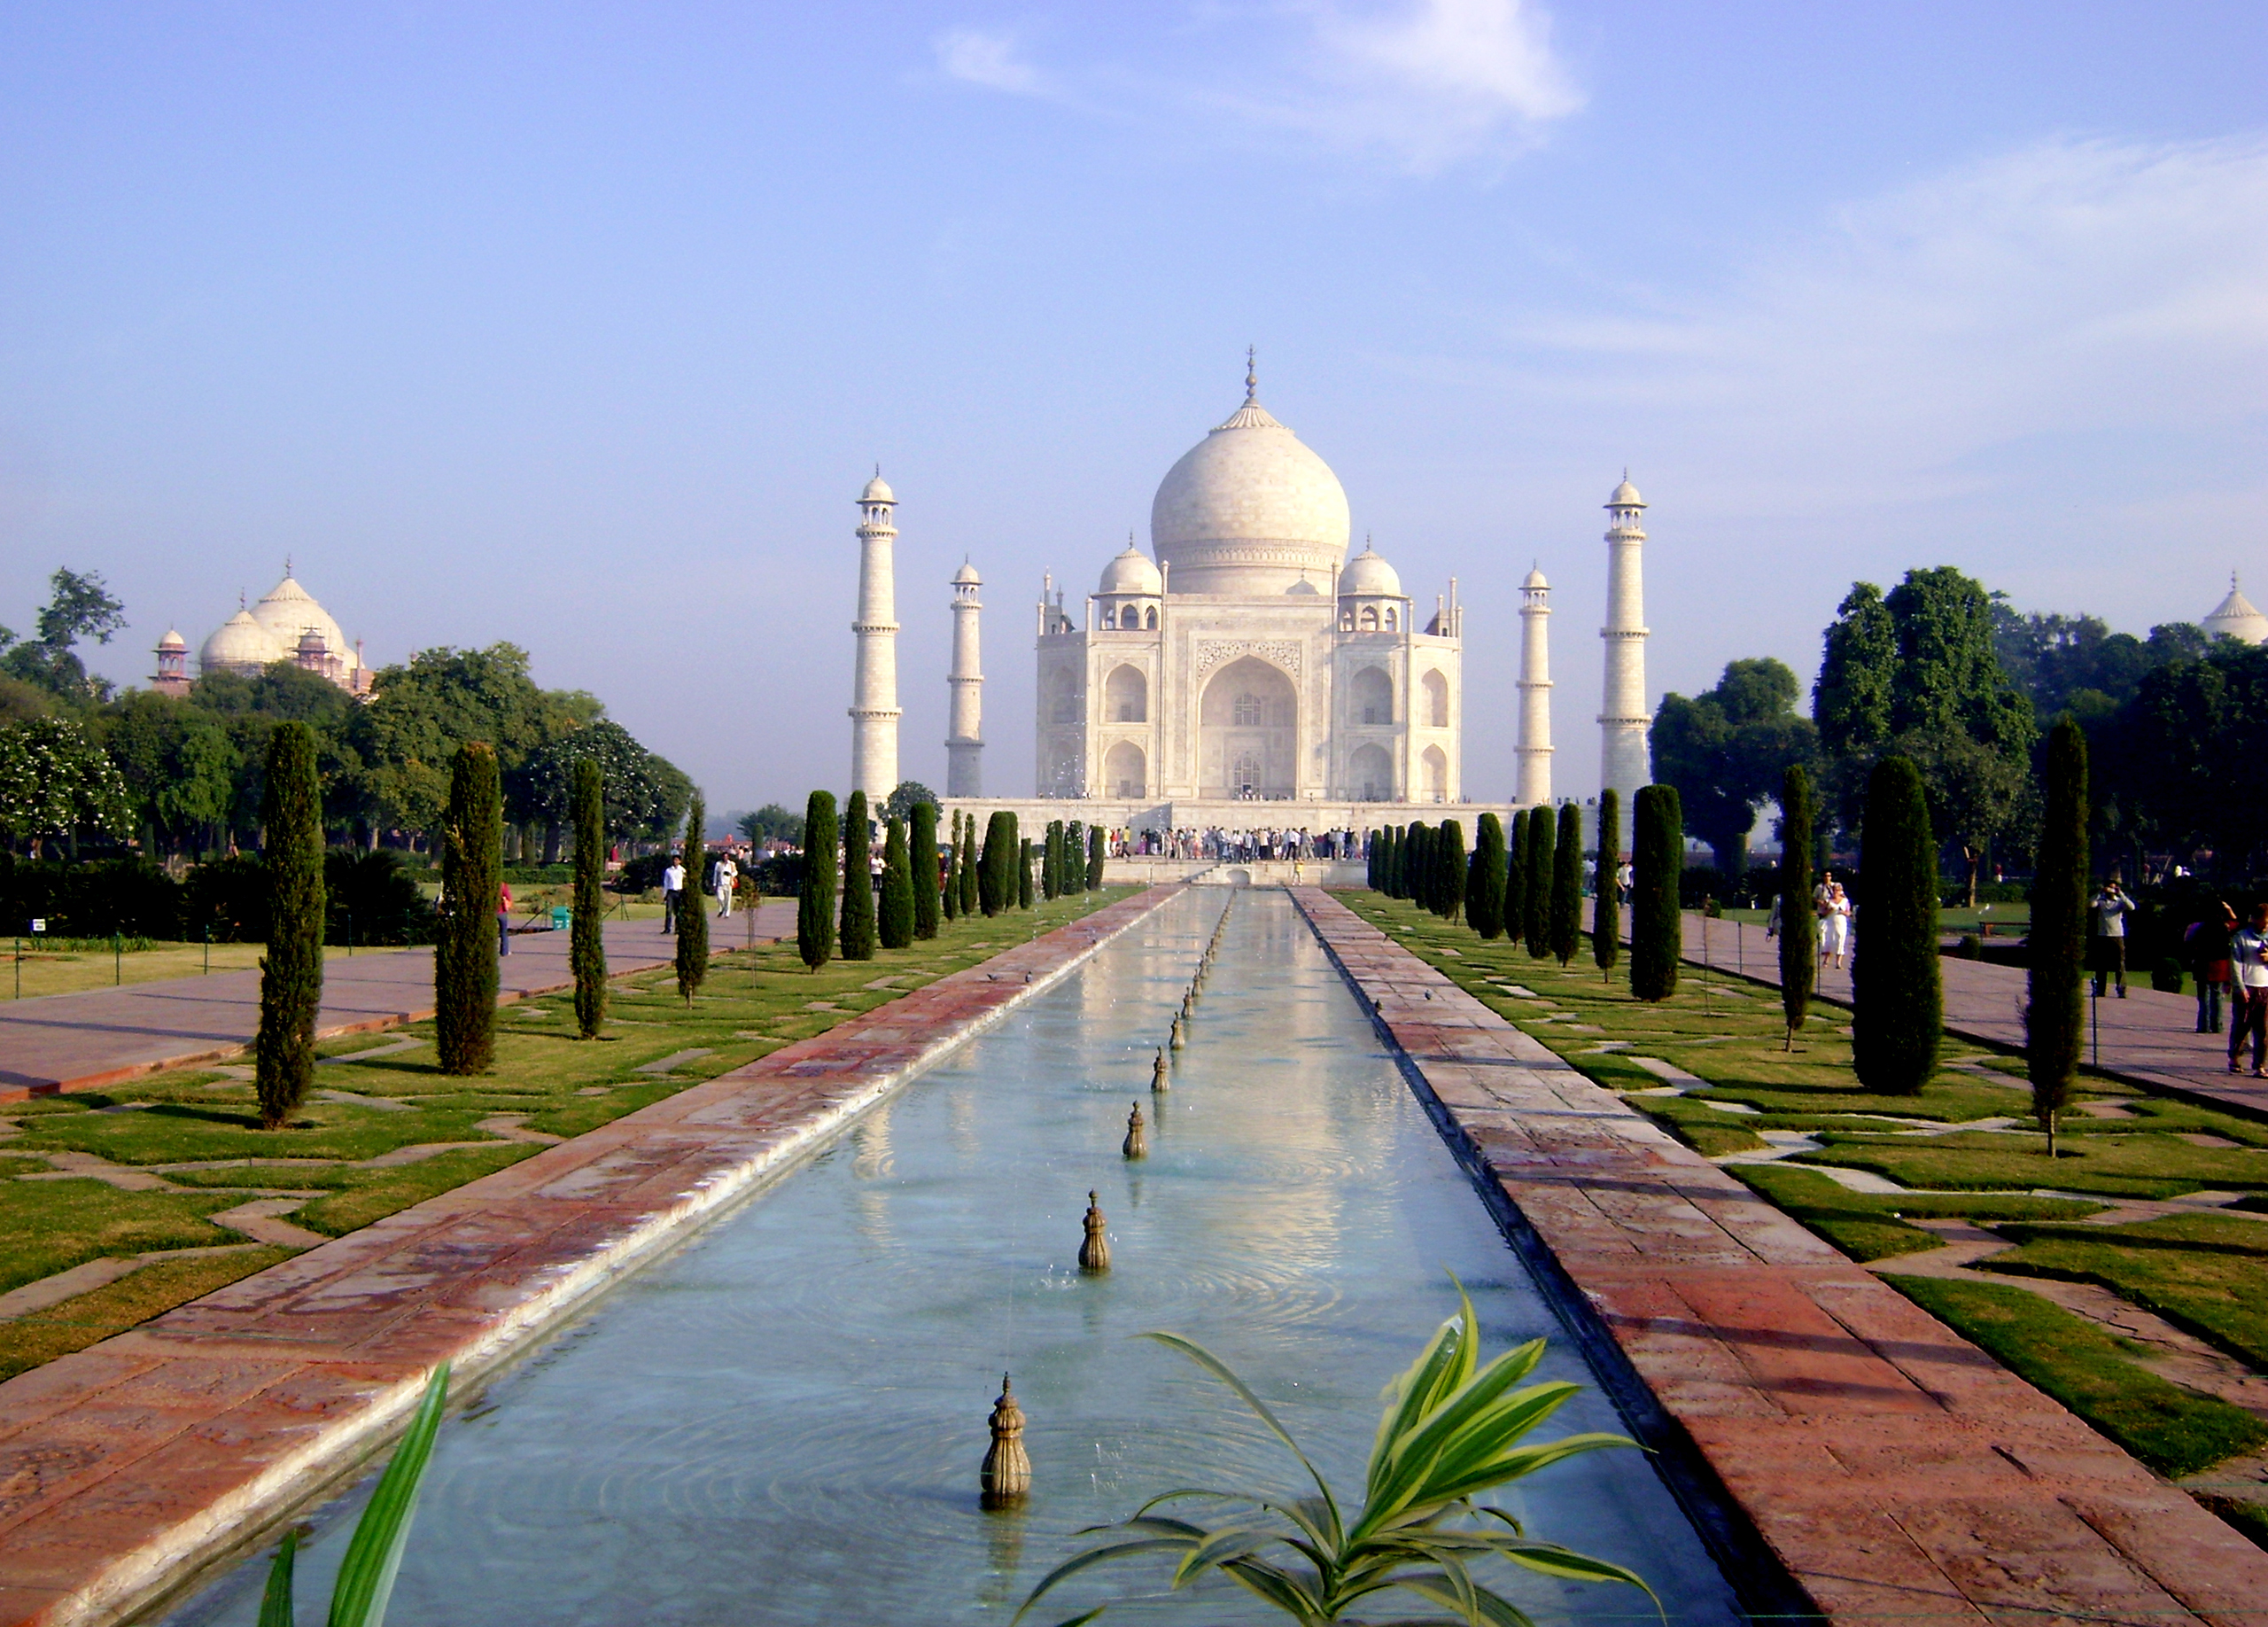 Flights to India in the $500s round-trip